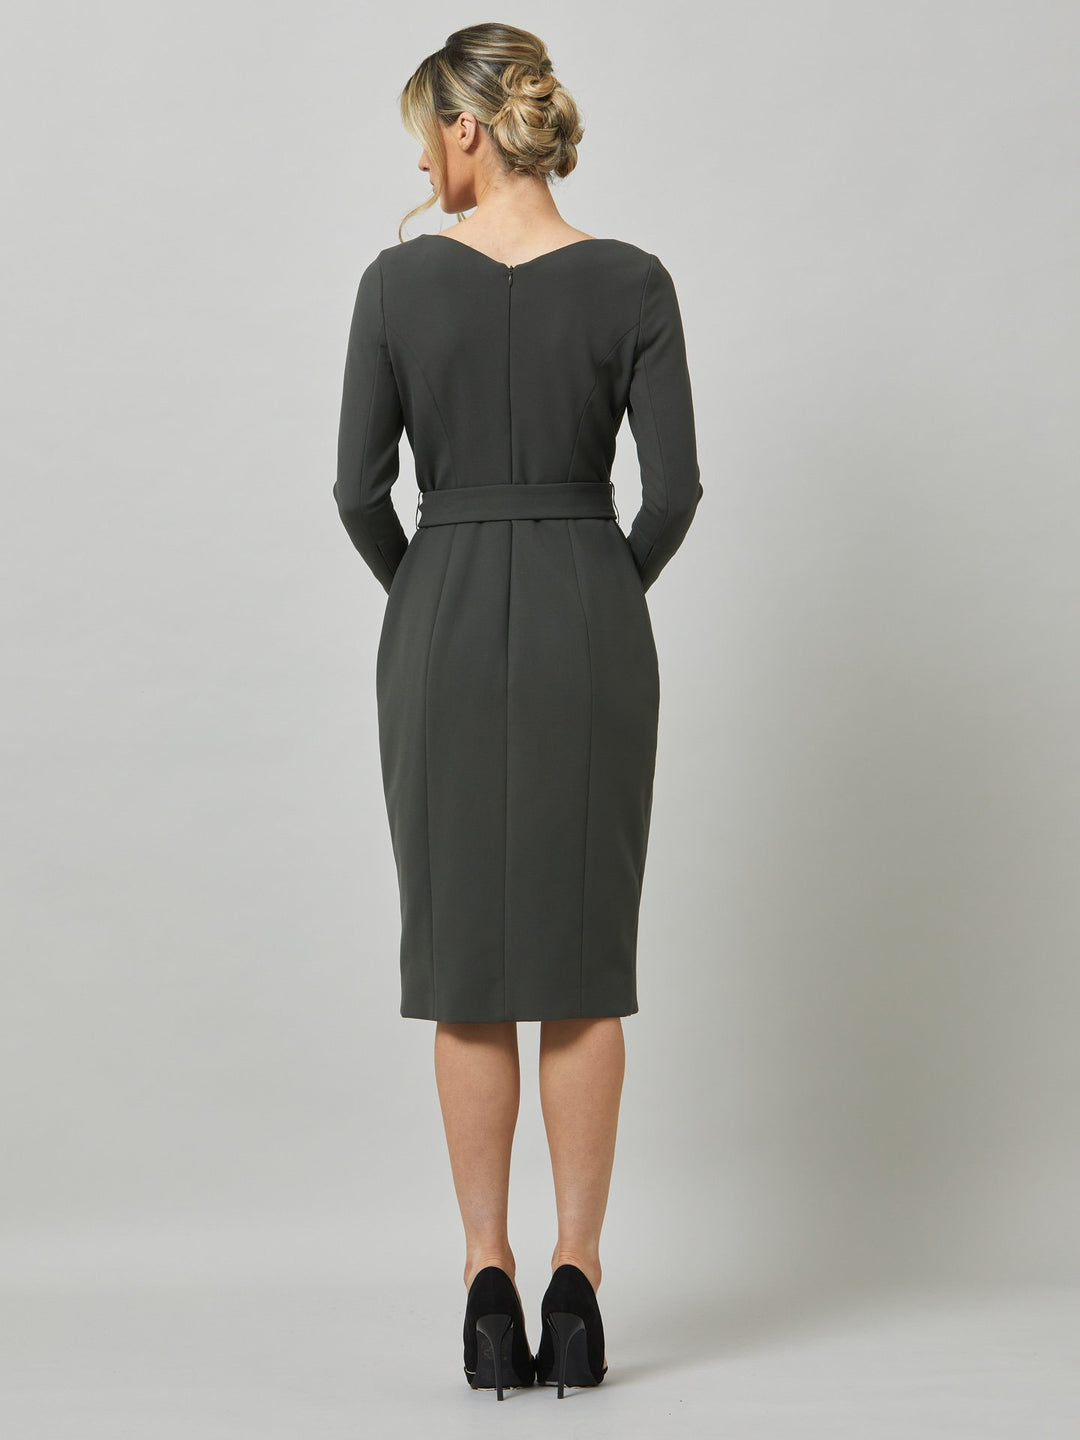 Celina, an elegant faux wrap pencil skirt dress in a smokey olive tone. Workwear redefined, the perfect desk to dinner dress. this body skimming silhouette falls below the knee and belted at the waist for a cinched profile, the ideal combination to accentuate the profile. Simply pair with heels for effortless elegance.